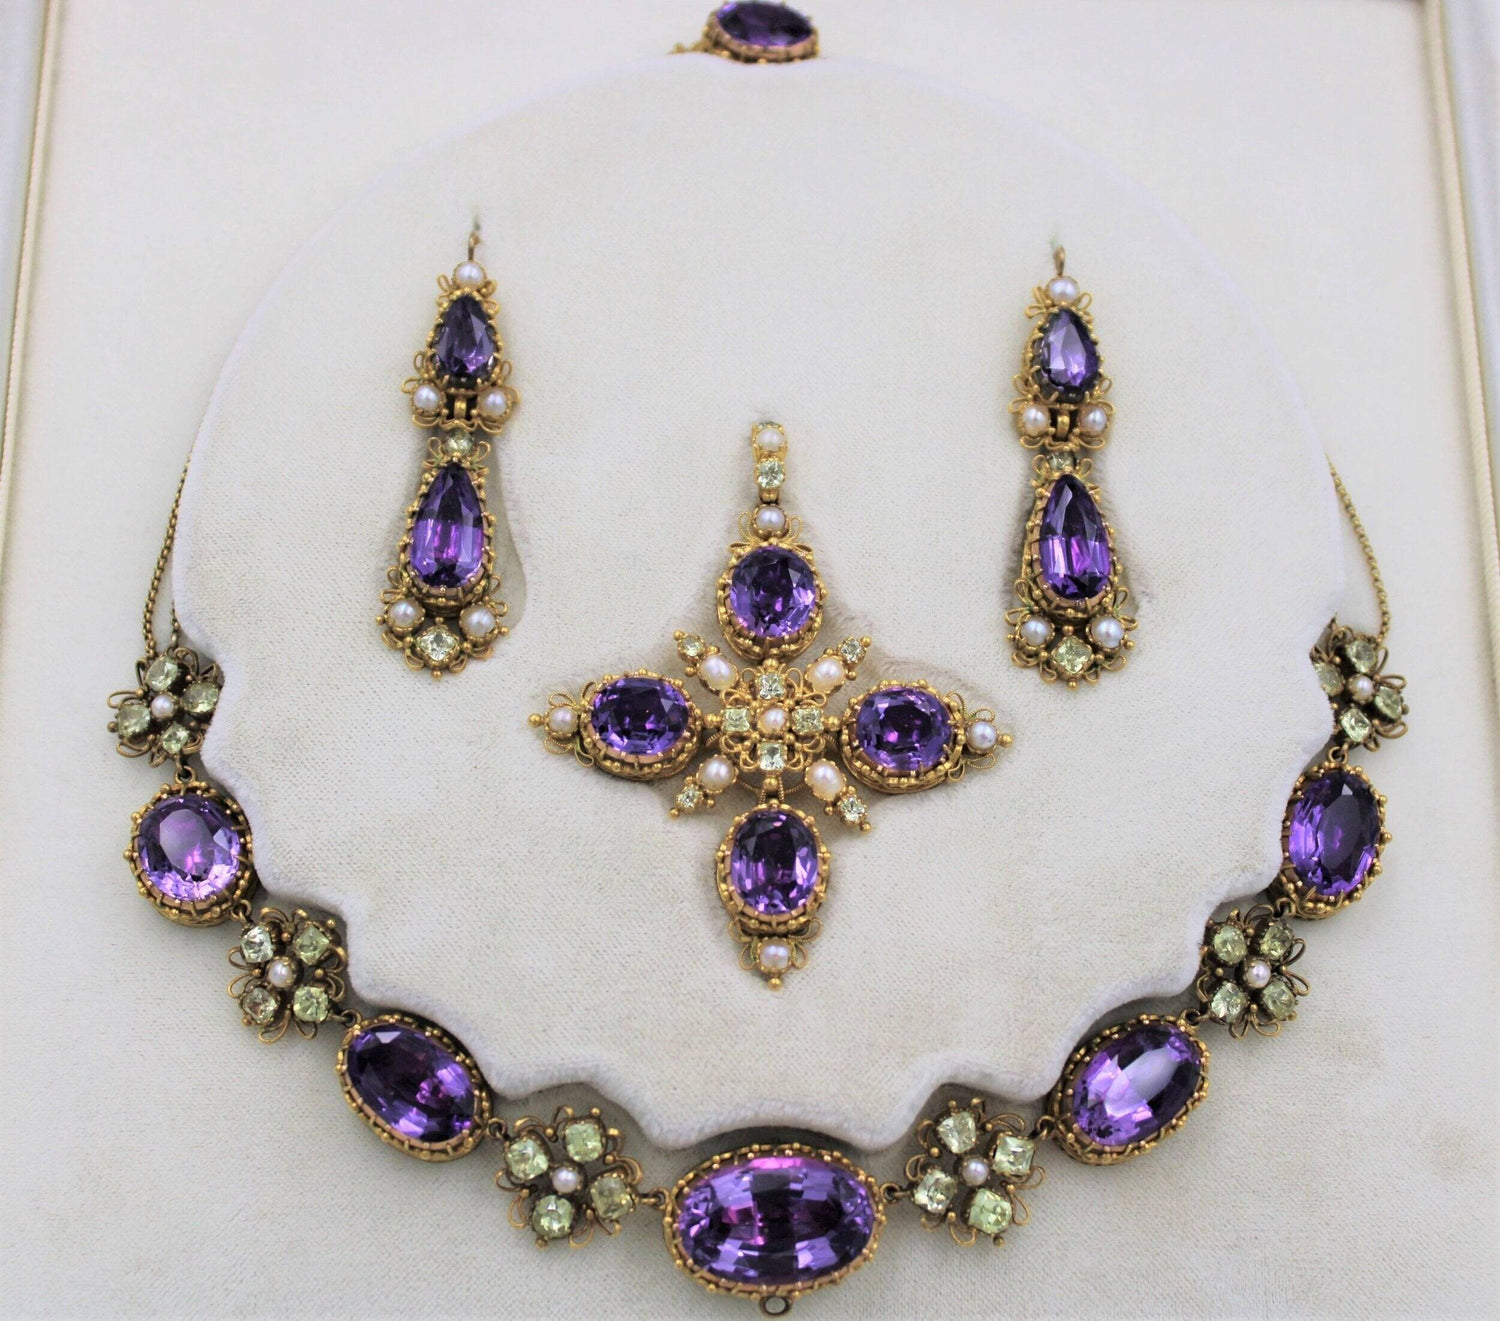 An exceptional example of a late Georgian Demi-Parure in High Carat Yellow Gold set with Amethysts, Seed Pearls and Chrysoberyl, English, Circa 1820 - Robin Haydock Antiques